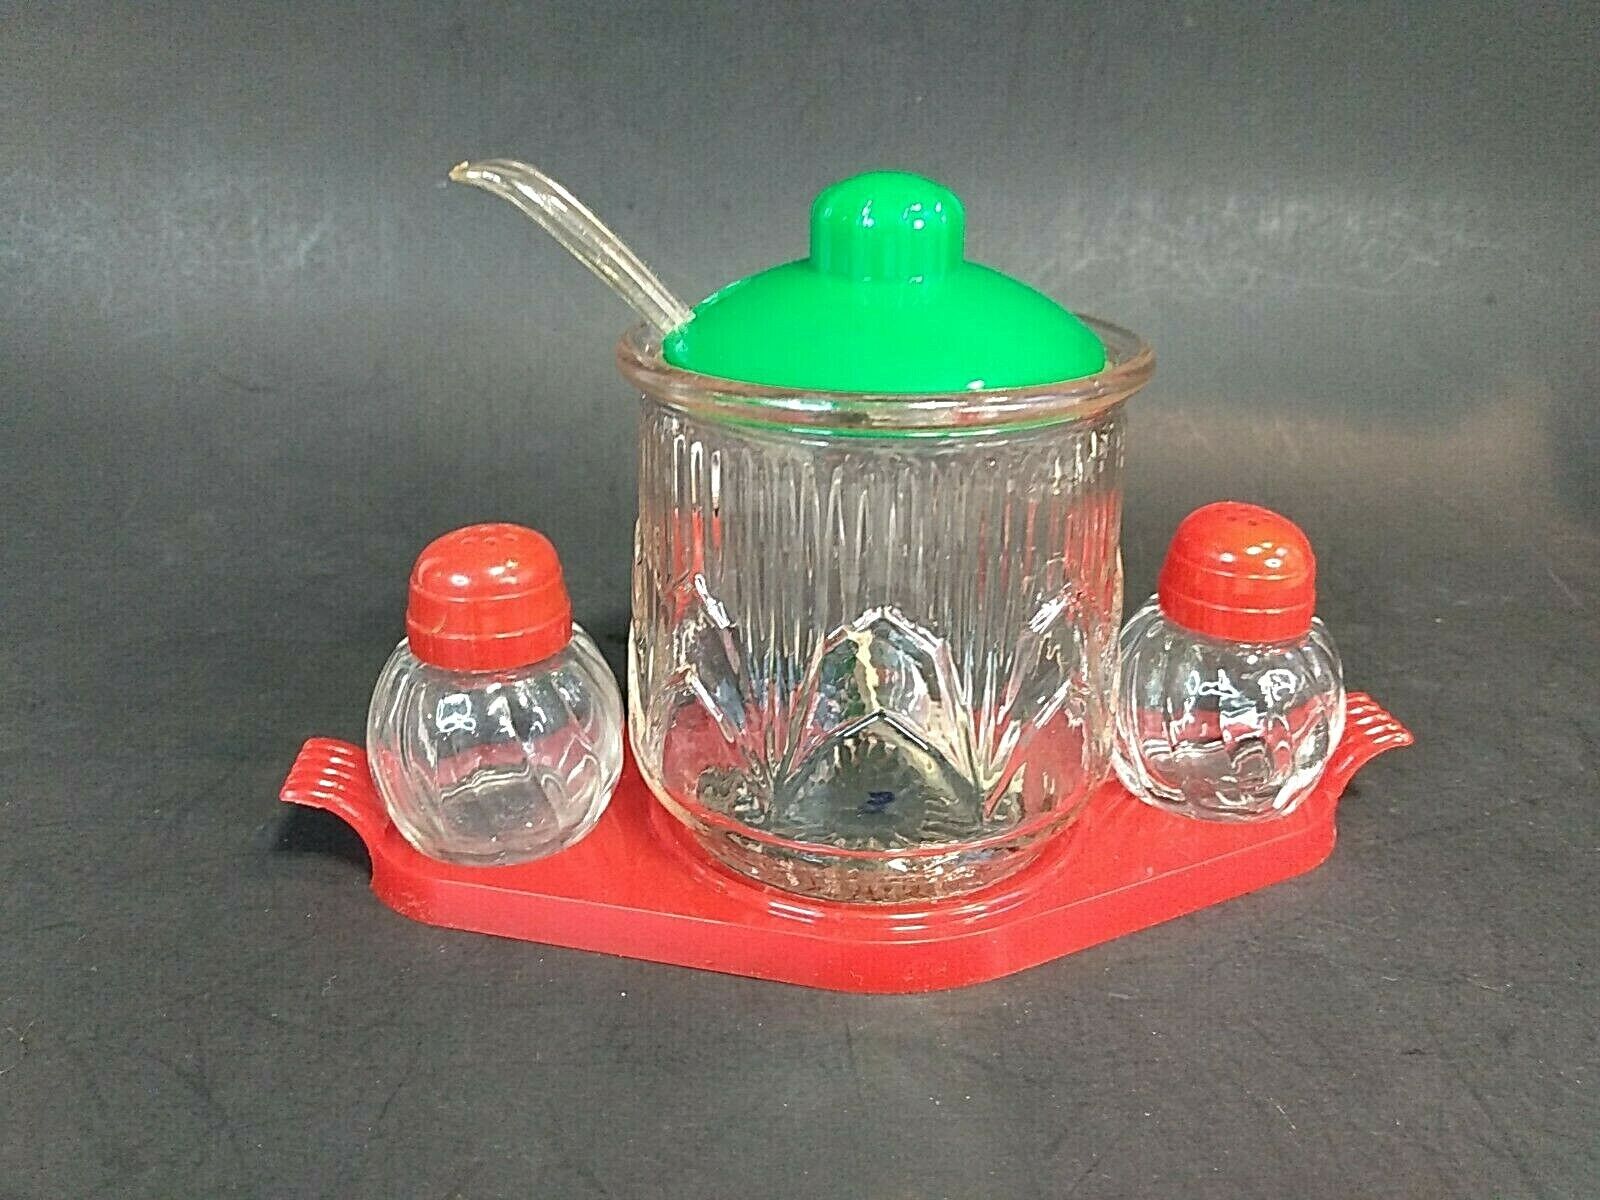 VTG Medco NY Salt & Pepper Shakers With Stand Clear Glass Red & Green Tops/Base